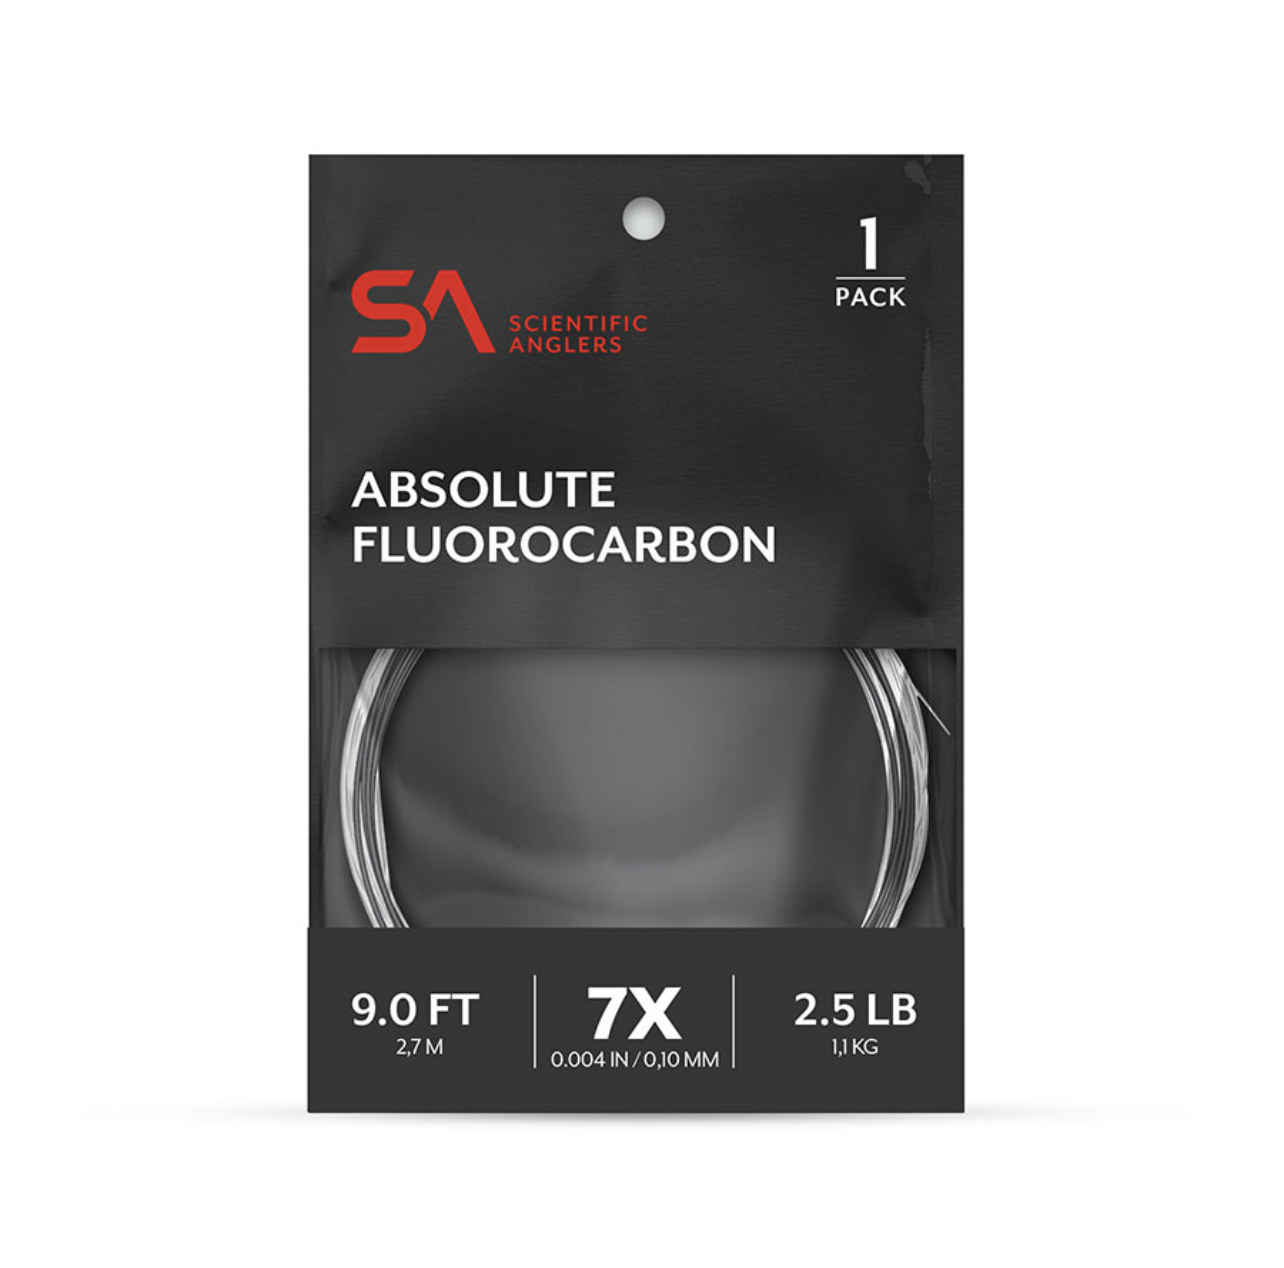 Scientific Anglers Absolute Fluorocarbon Leader - 9ft - 4X - 6.7lb